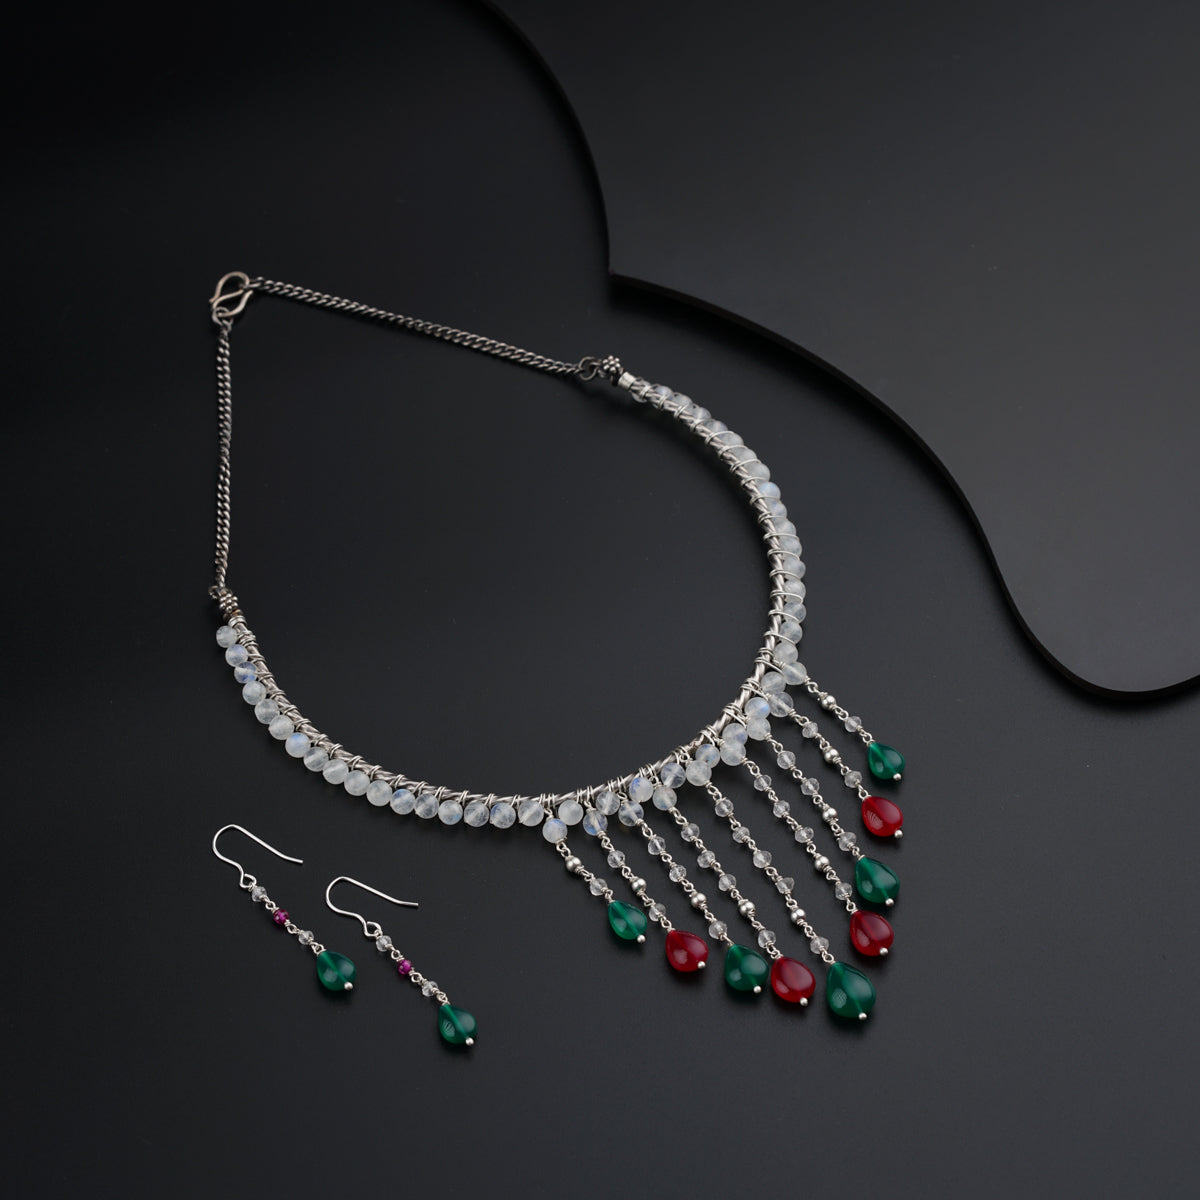 a necklace and earring set on a black surface